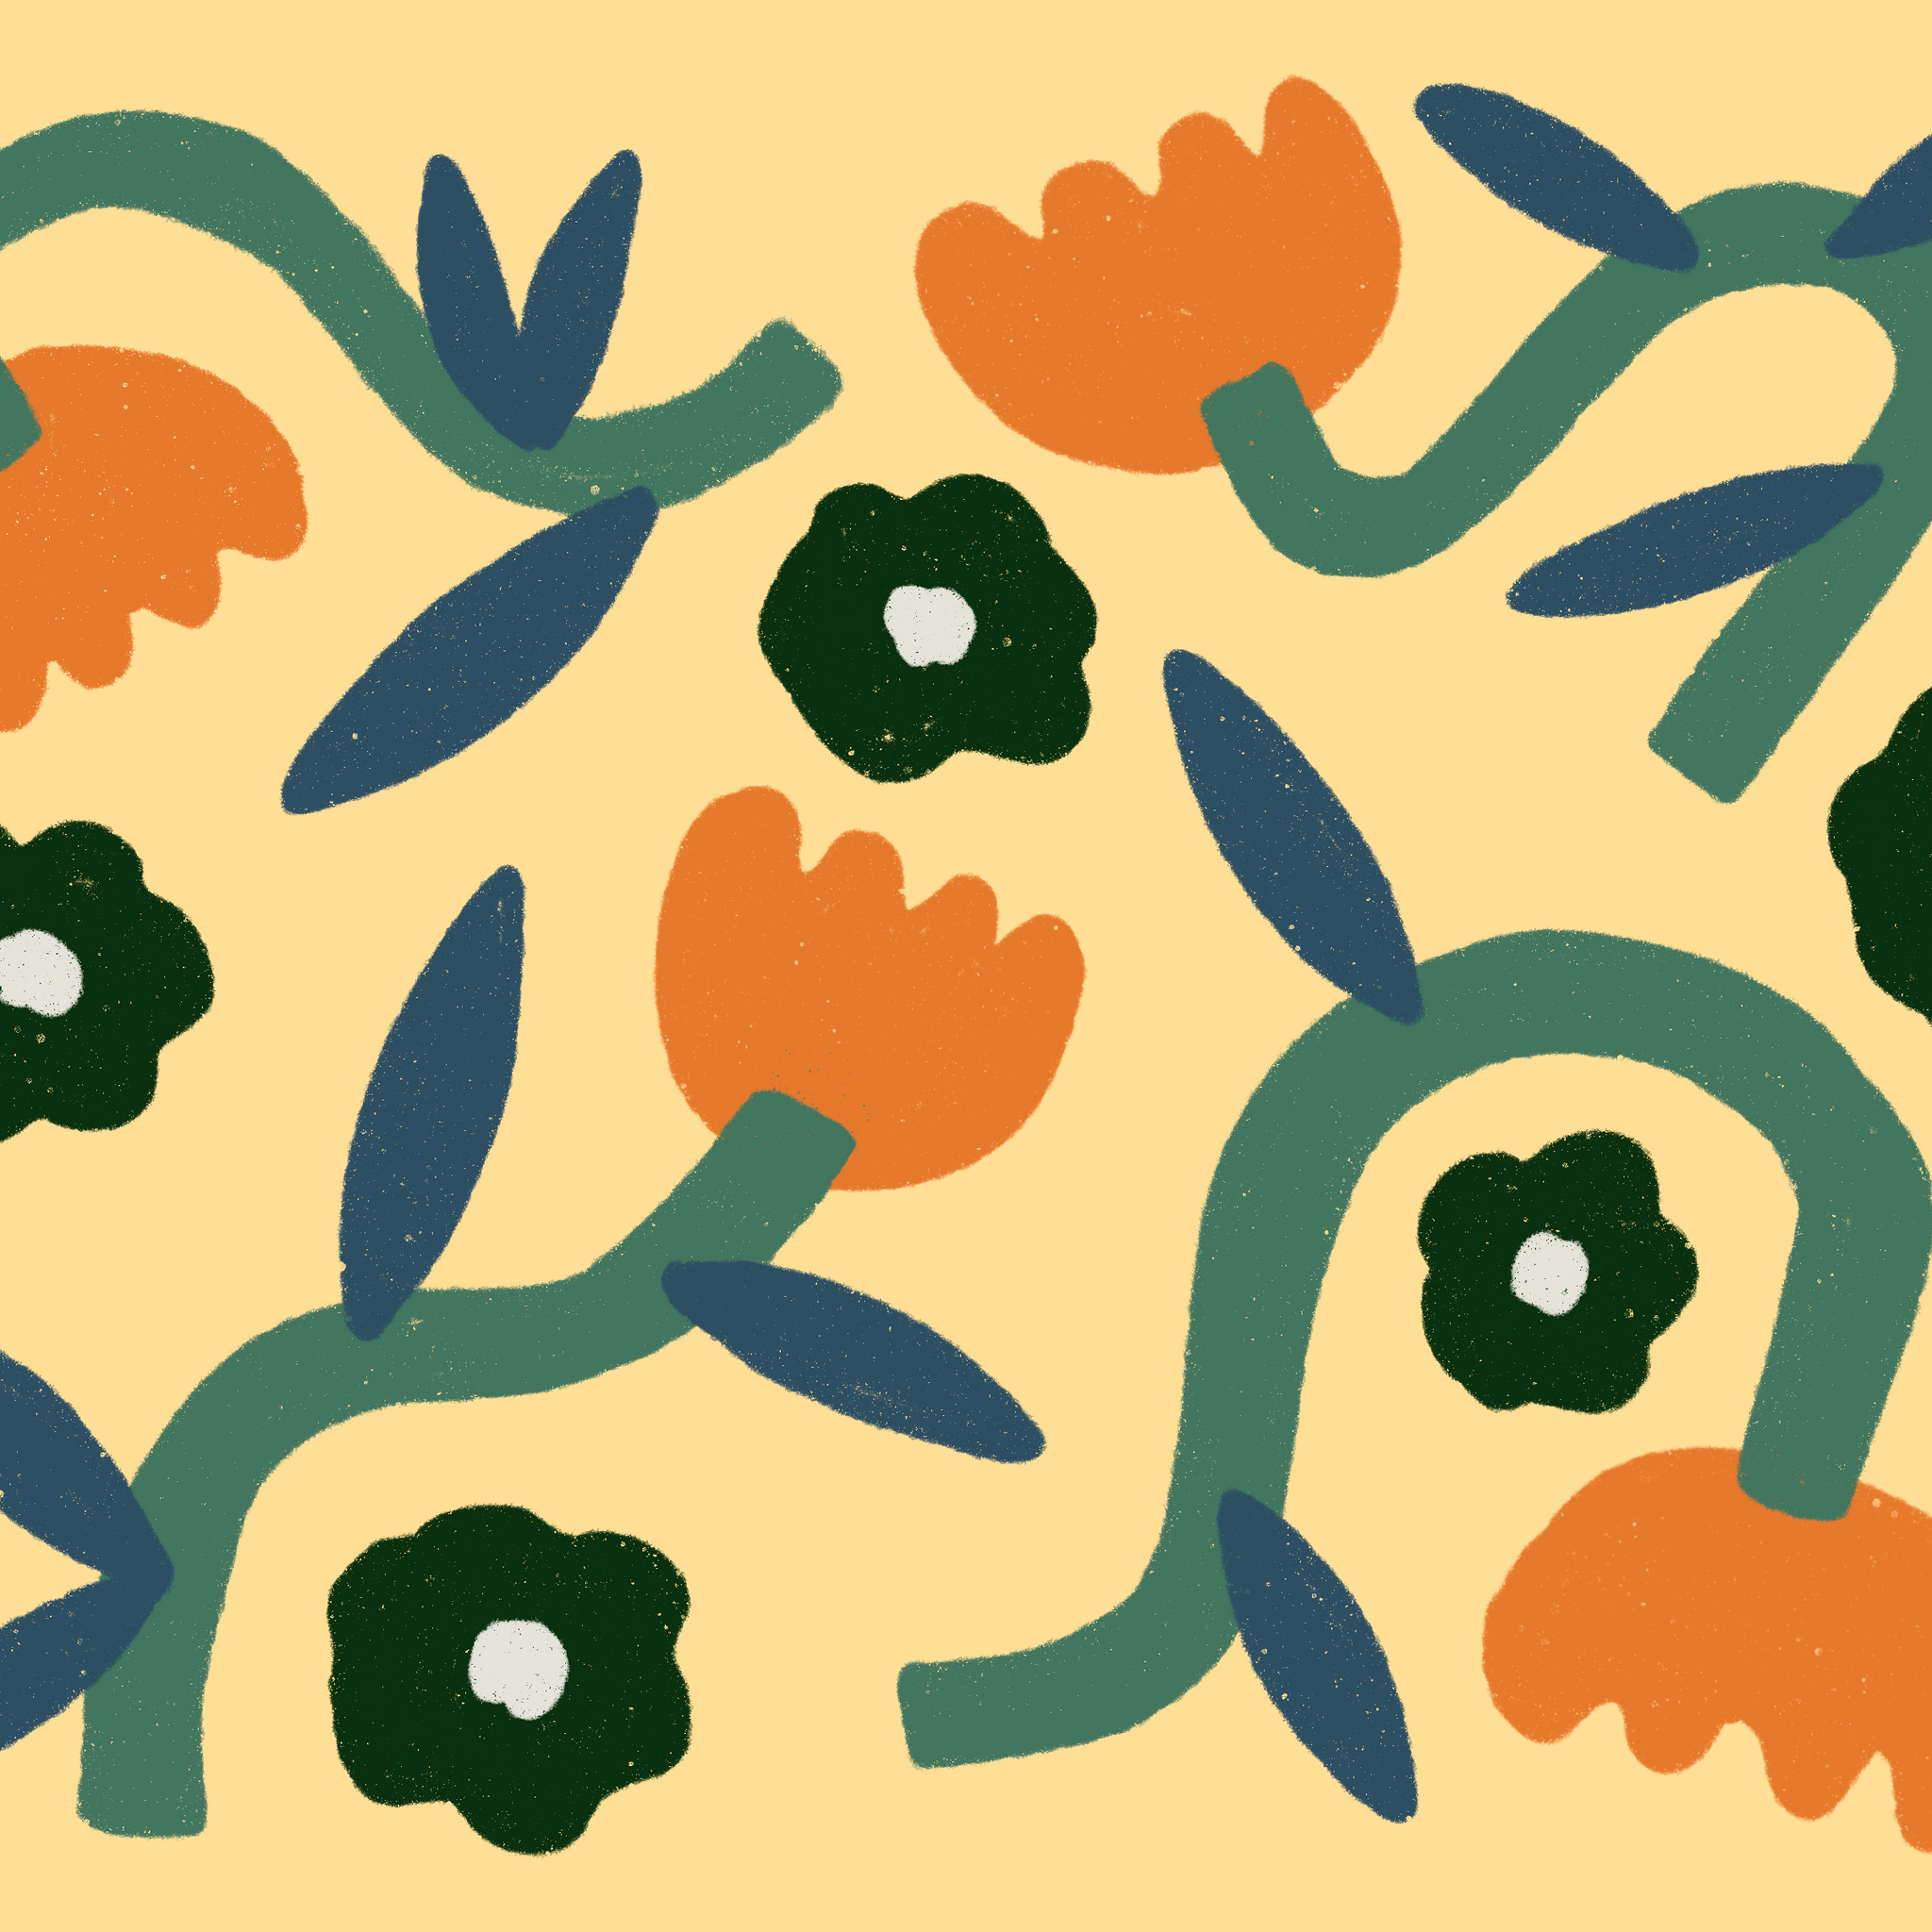 Digital art of flower and leaf shapes by Emily Clark.